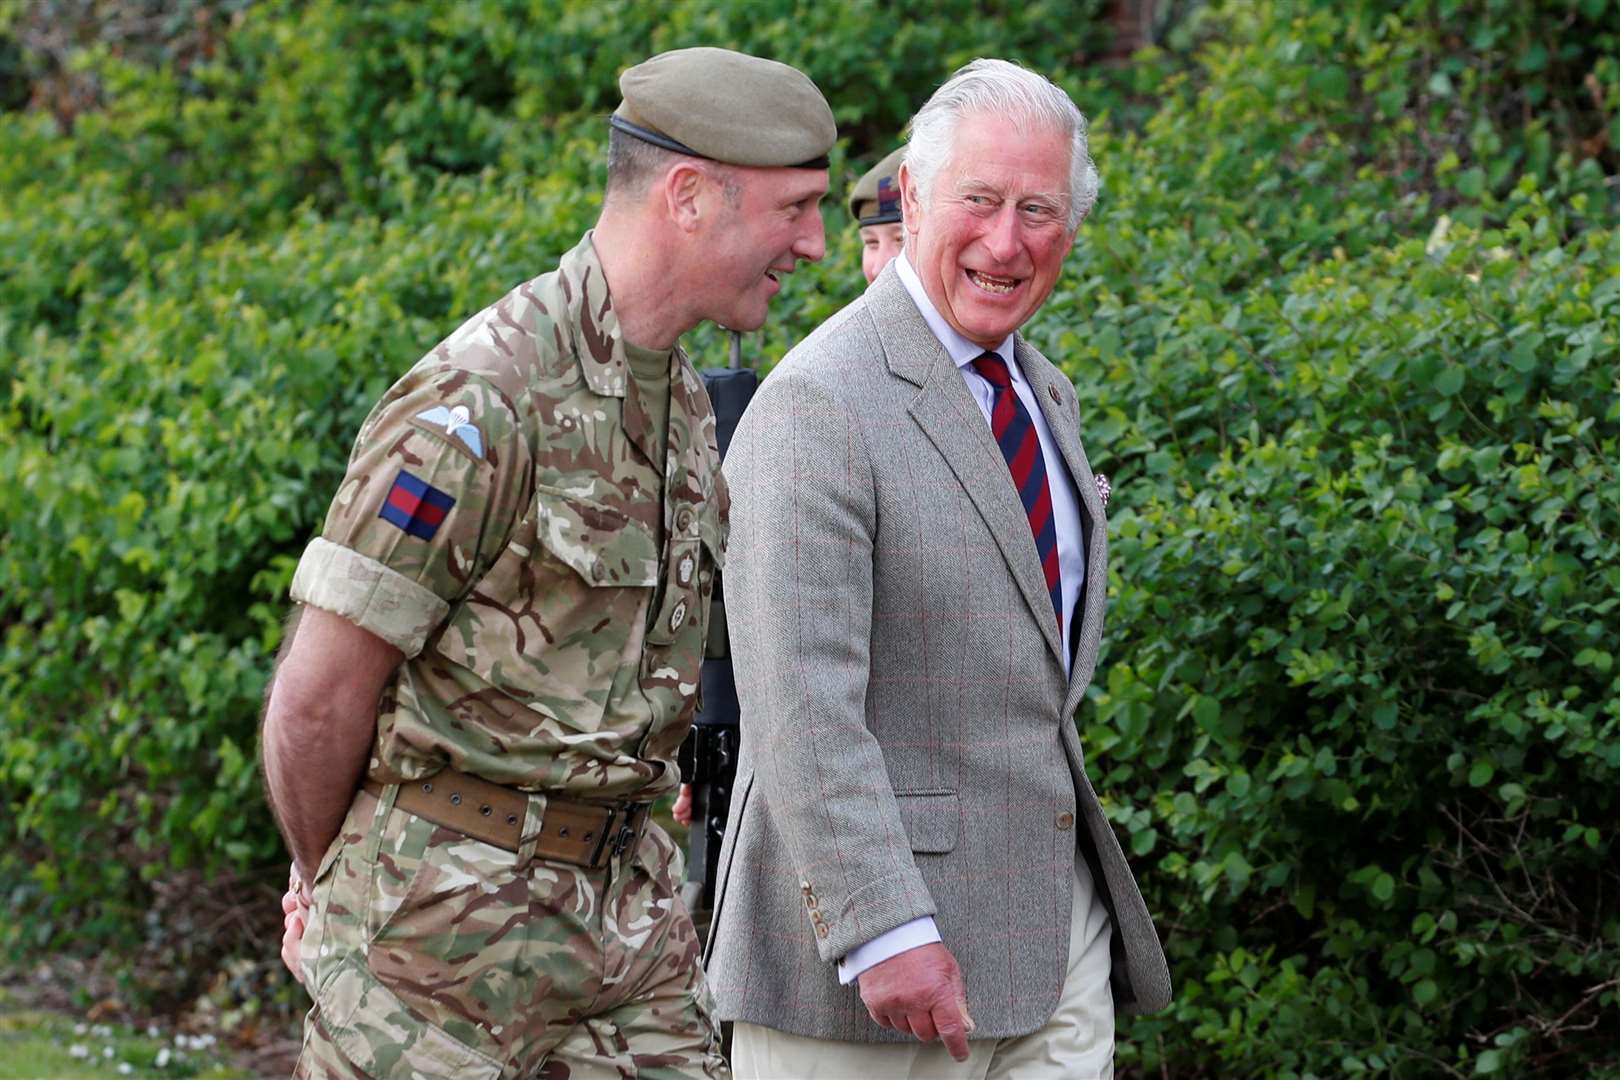 Charles said the charity has been a ‘constant’ throughout its history (Peter Cziborra/PA)